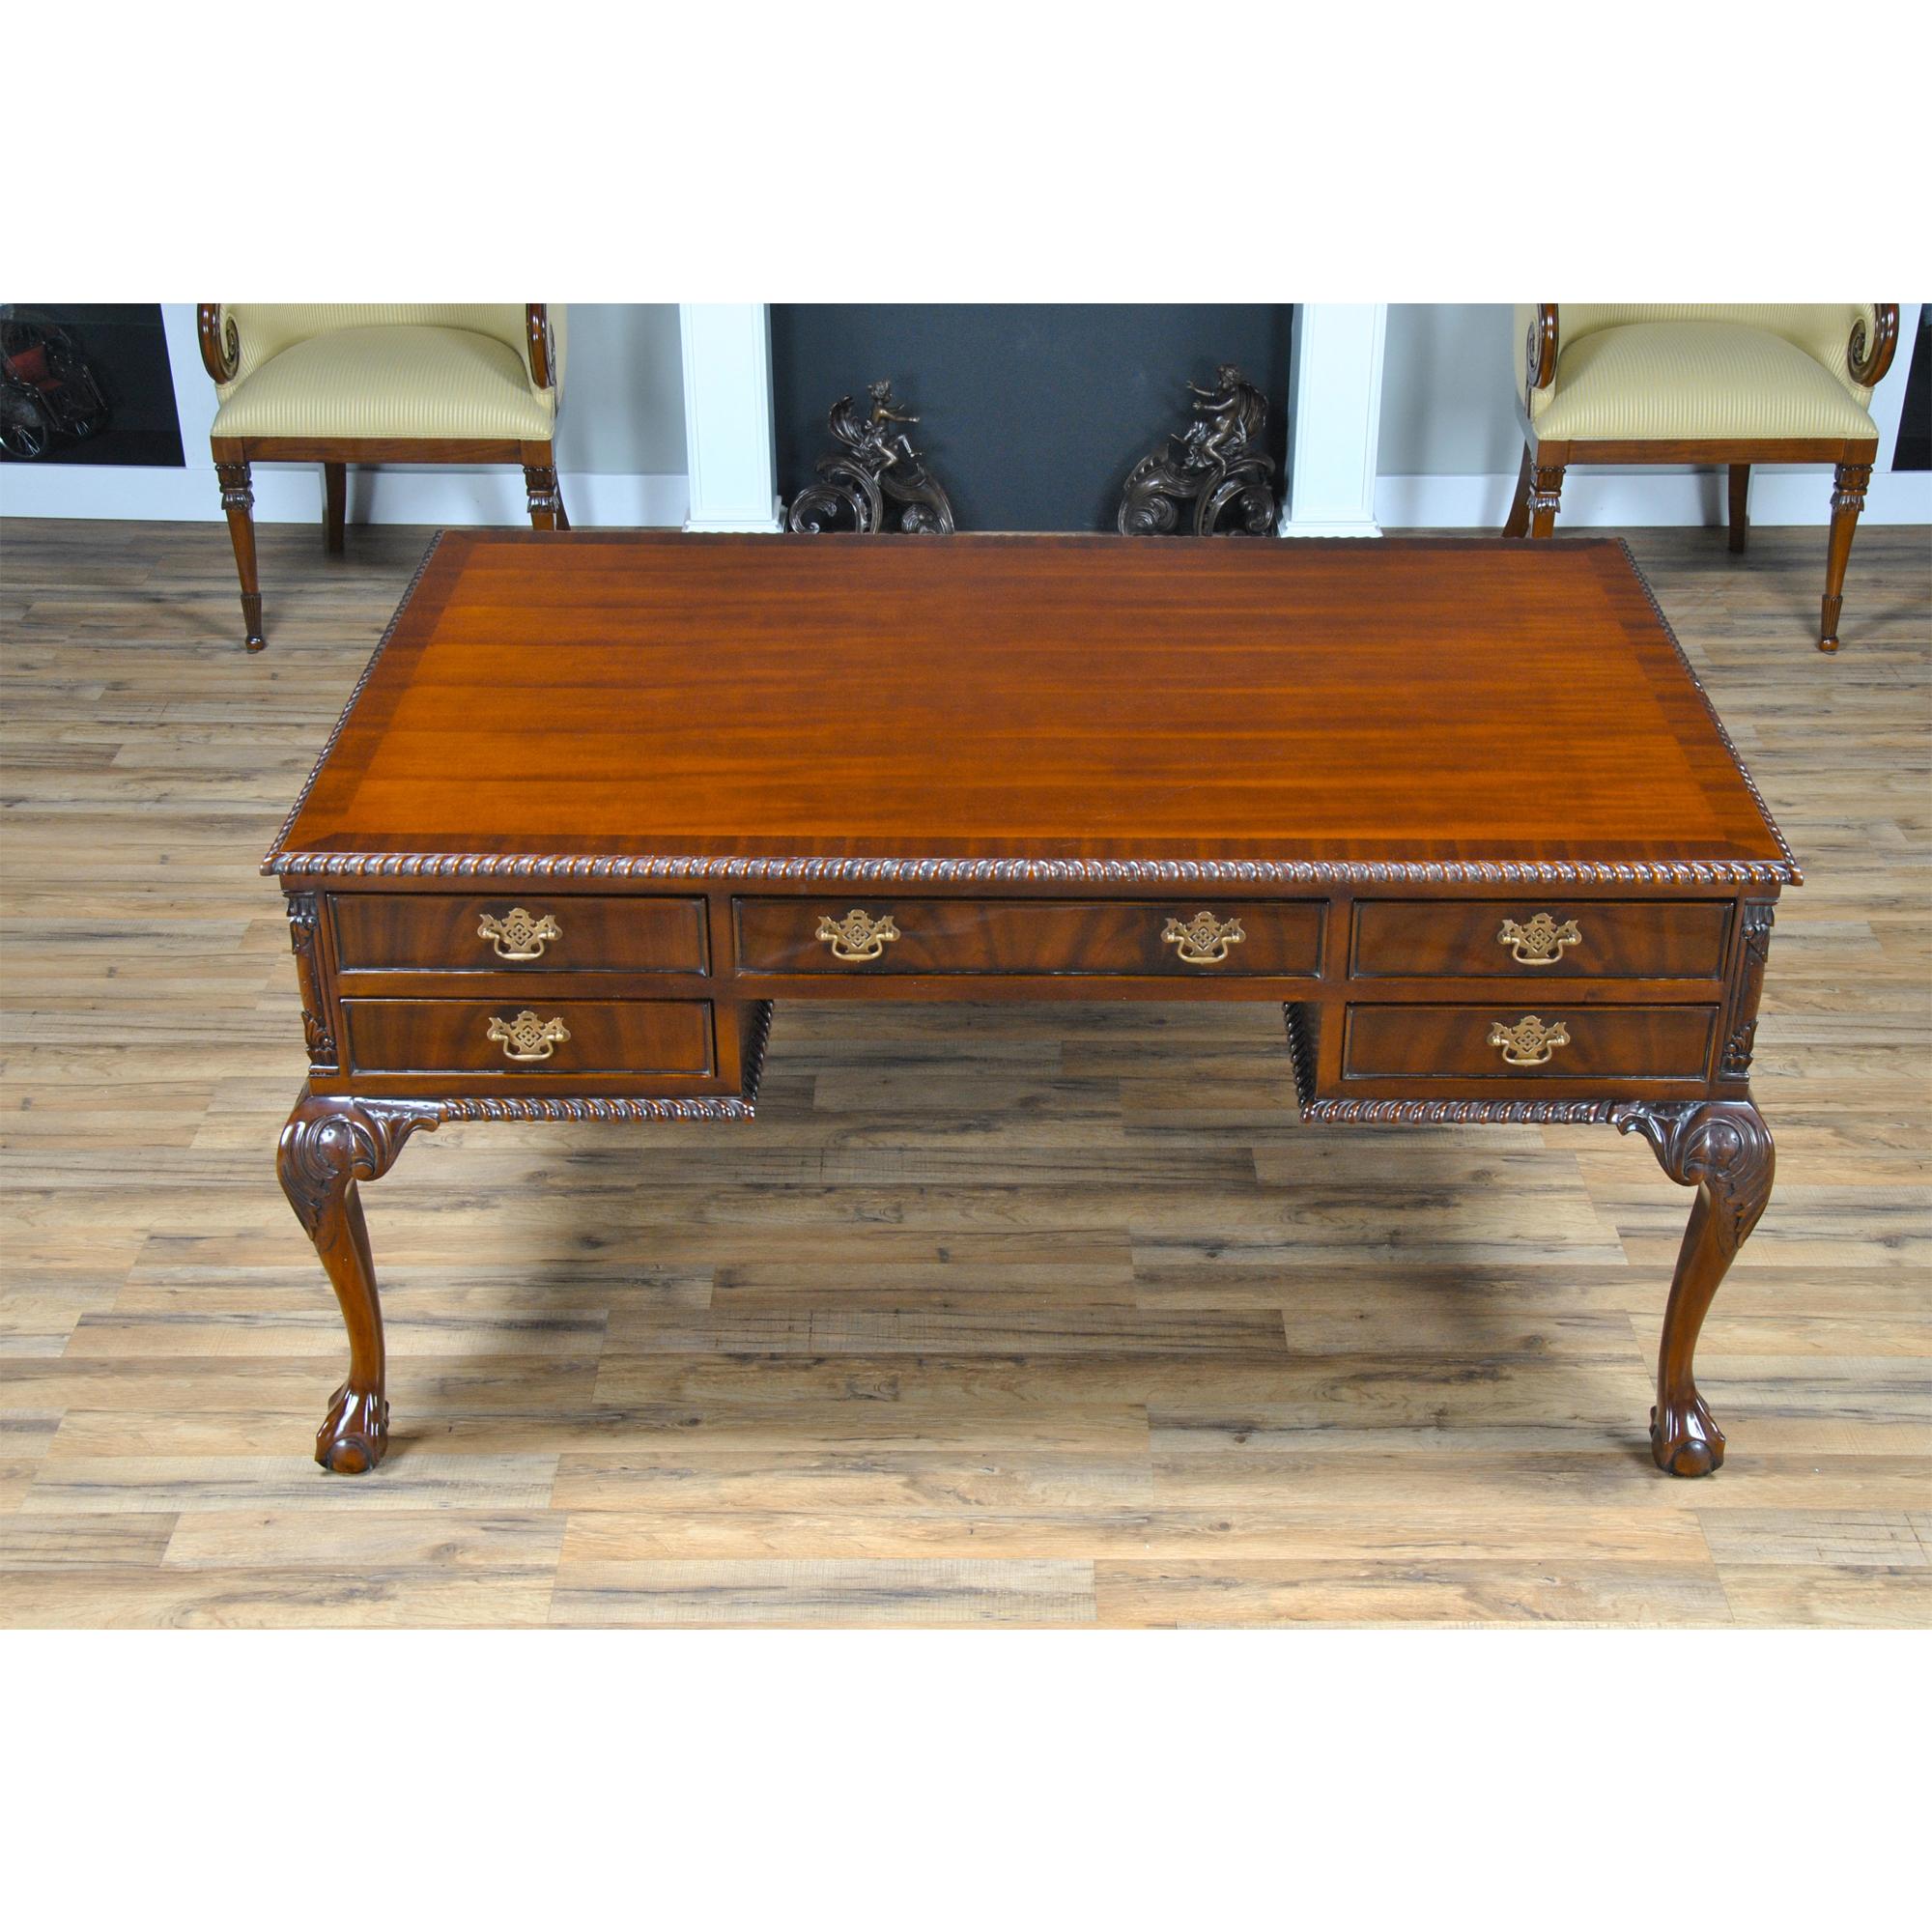 This is the Niagara Furniture version of the Mahogany Chippendale Partner Desk. It is a true partner’s desk in every sense of the phrase with an equal number of drawers on each side of the desk. This Chippendale style high quality writing desk sets